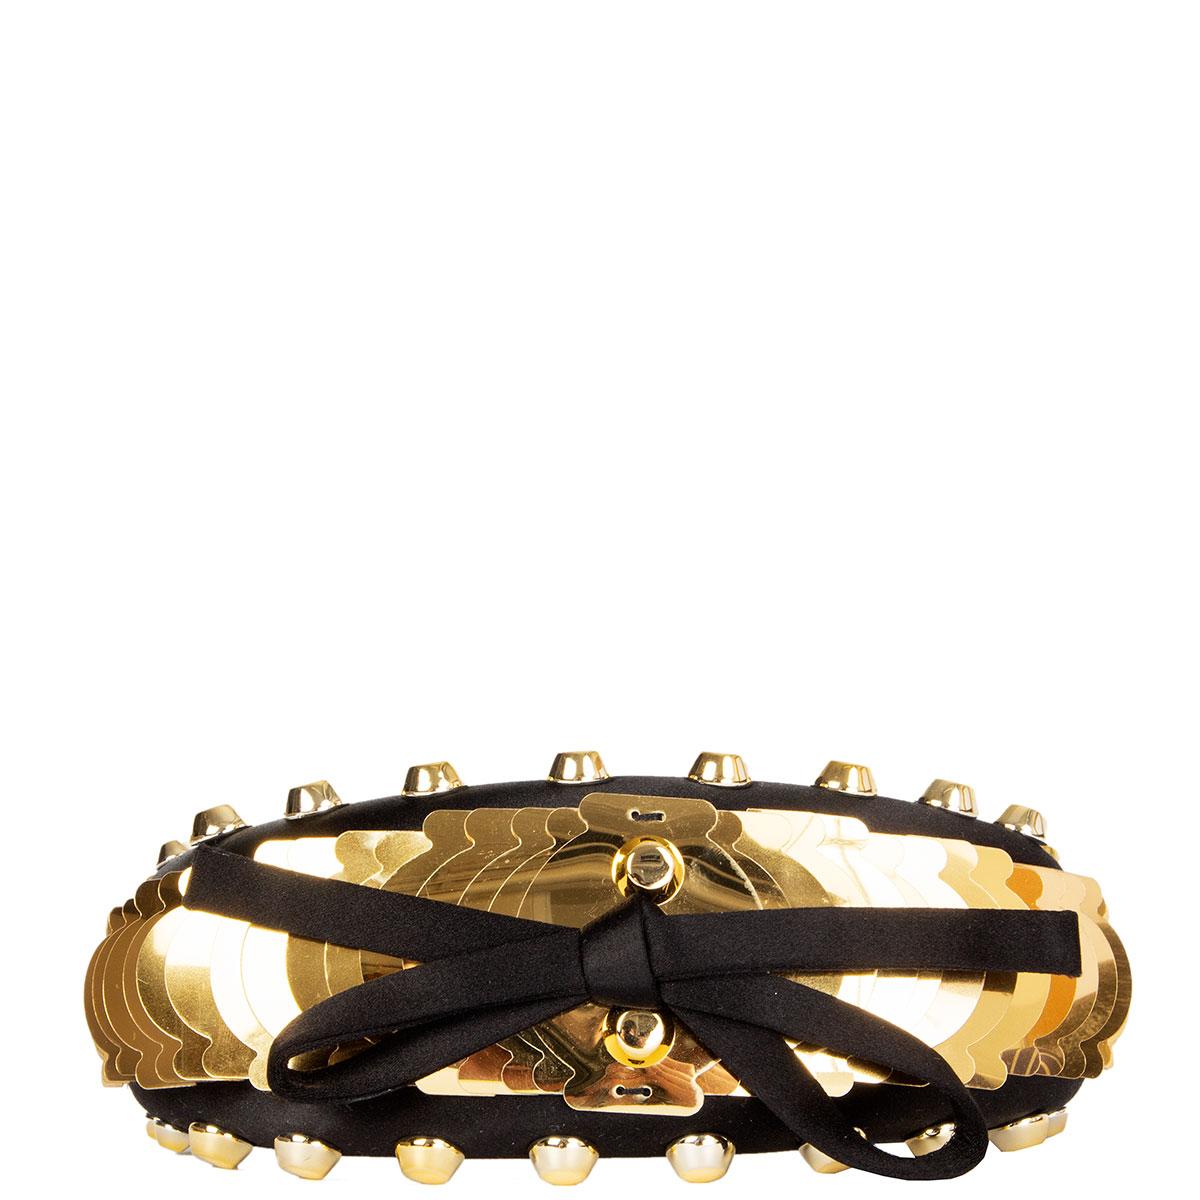 100% authentic Prada studded and embellished gold-tone acetate headband in black satin with bow detail. Has been worn and is in excellent condition. 

All our listings include only the listed item unless otherwise specified in the description above.